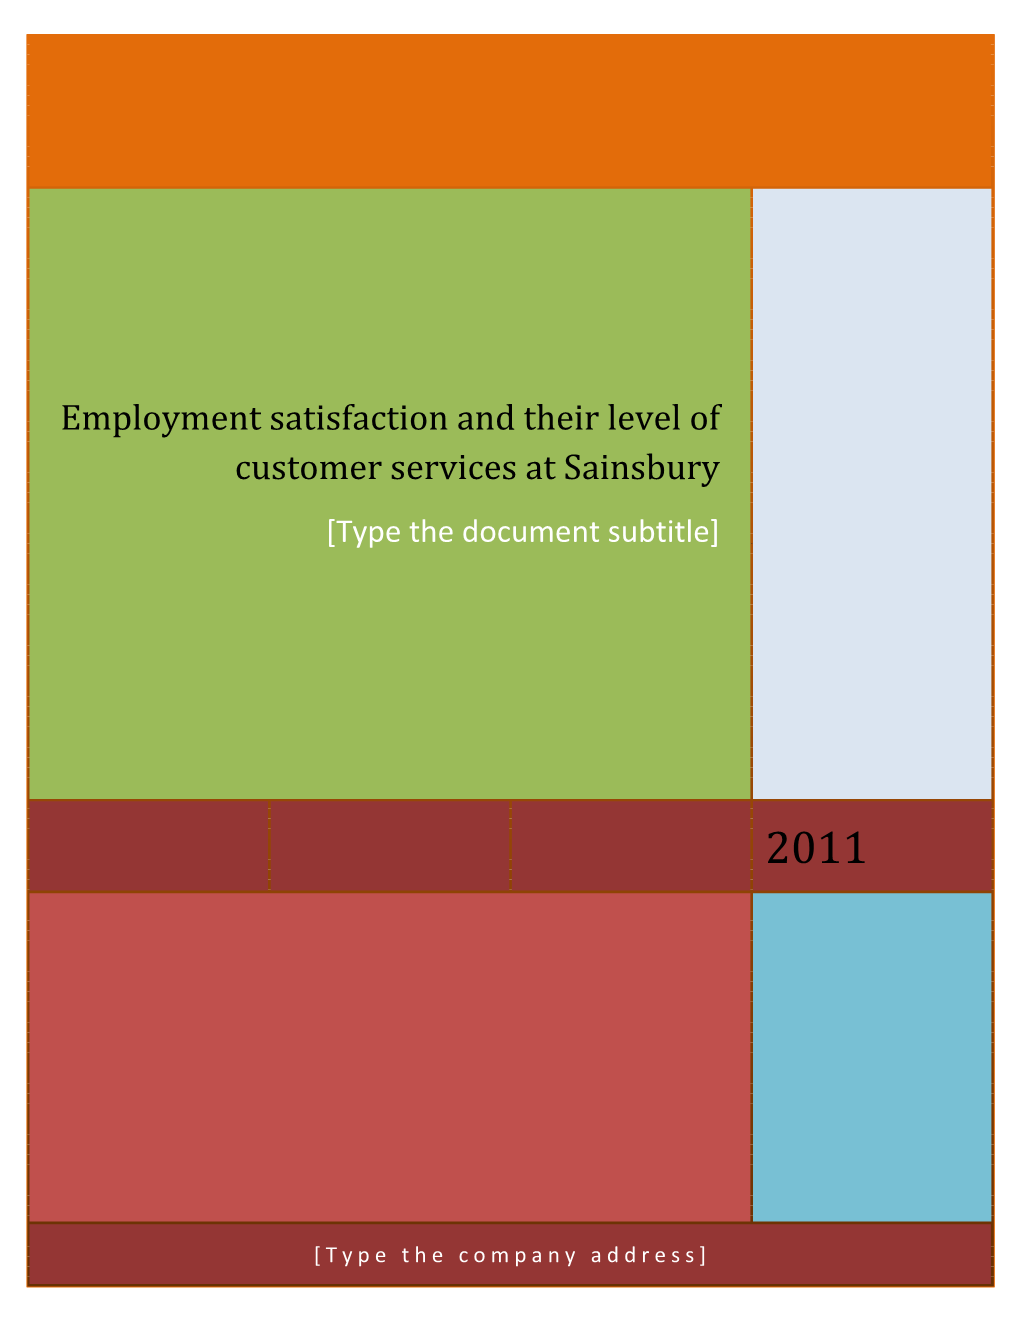 Employment Satisfaction and Their Level of Customer Services at Sainsbury